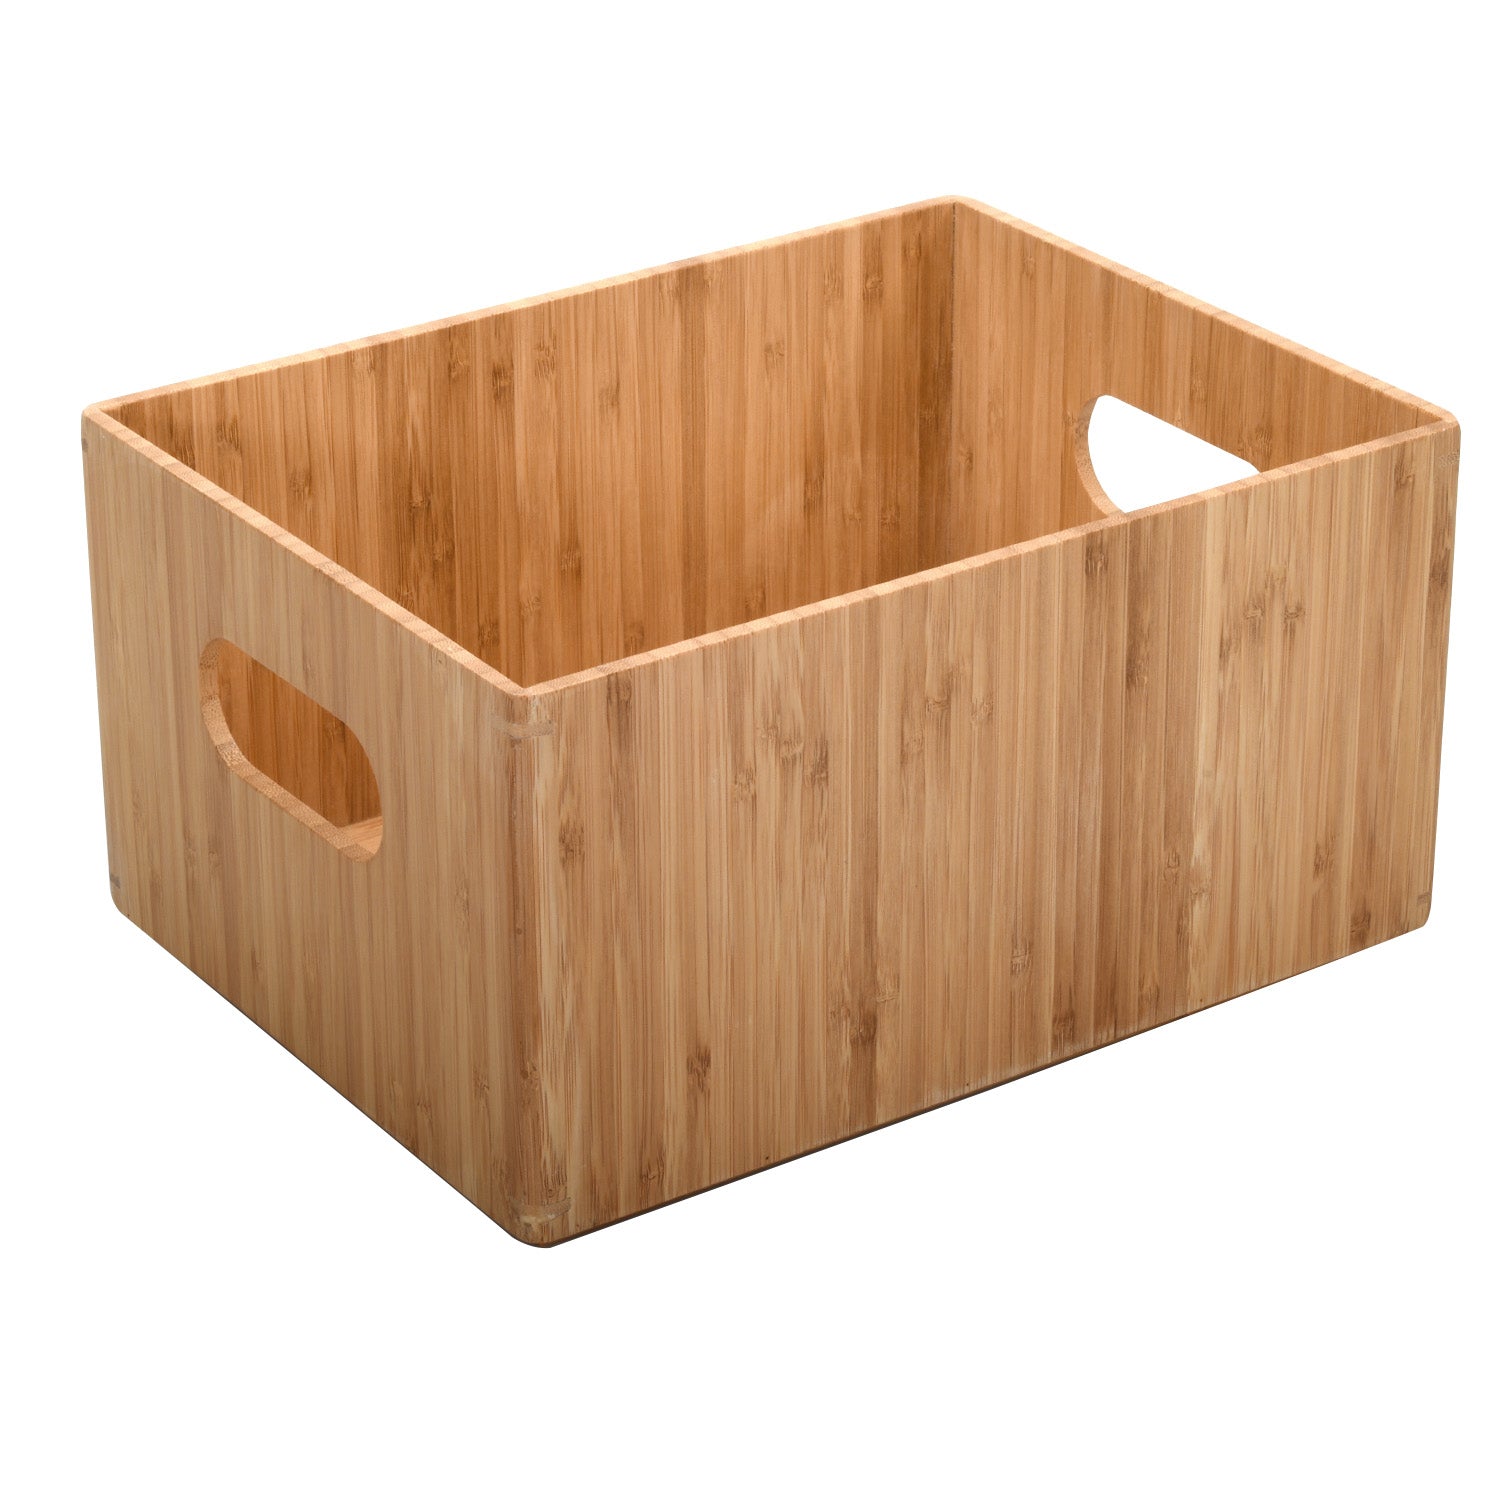 Mobilevision Bamboo Storage Box, 9”x12”x 6”, Durable Bin w/Handles, Stackable - for Toys Bedding Clothes Baby Essentials Arts & Crafts Closet & Office